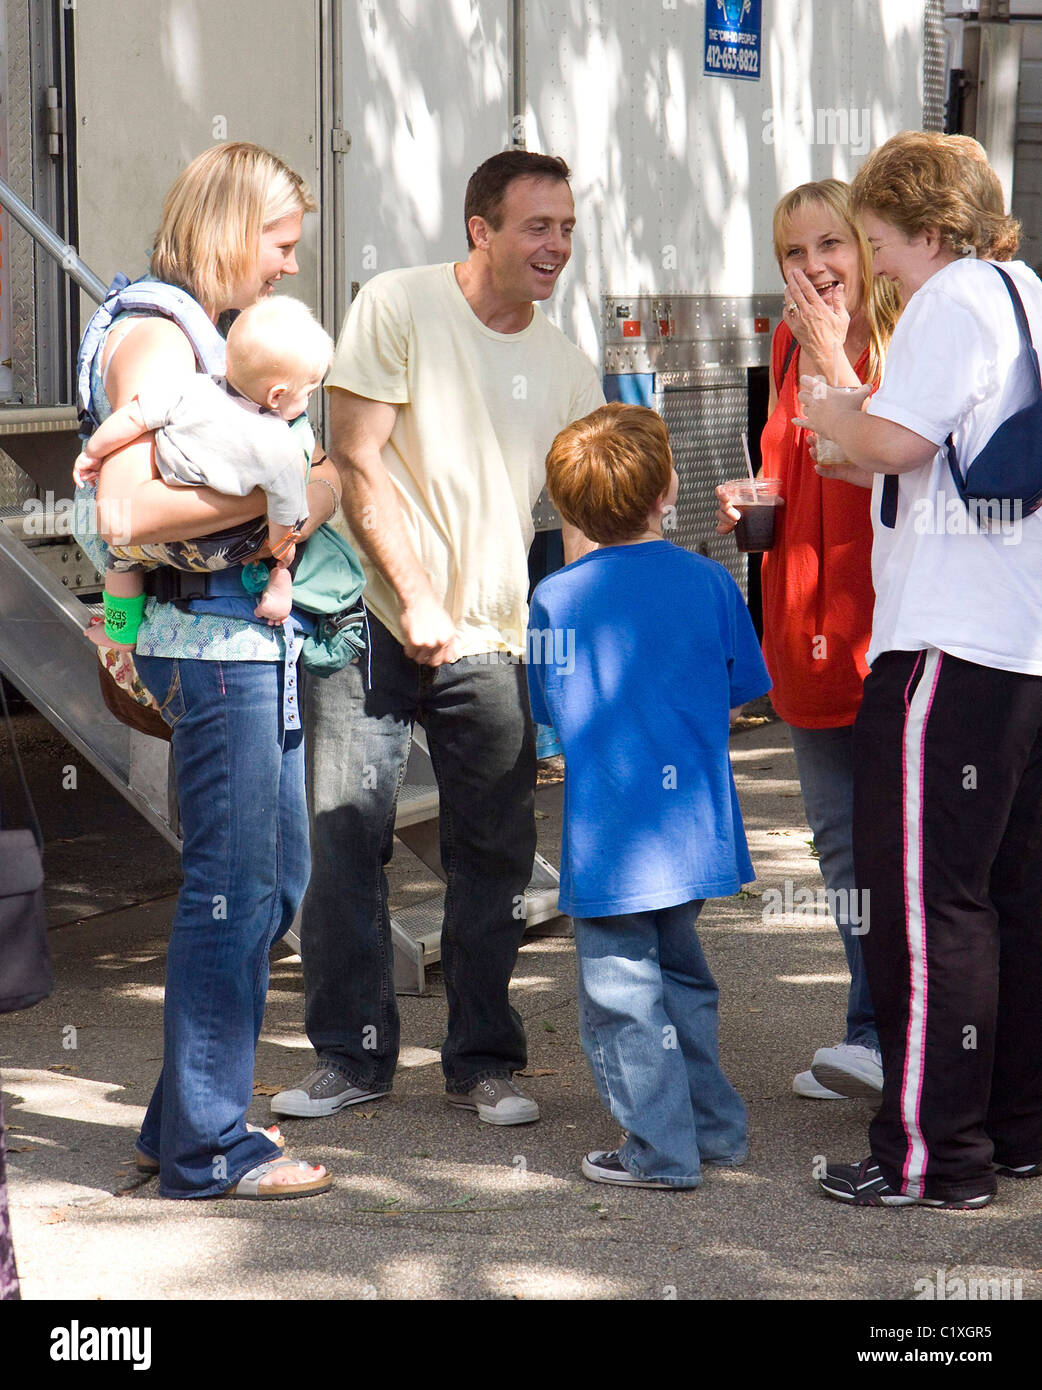 David Eigenberg, son Louie Steven Eigenberg, wife Chrysti and movie son Joseph Pupo on the set of new movie Sex and the City Stock Photo pic